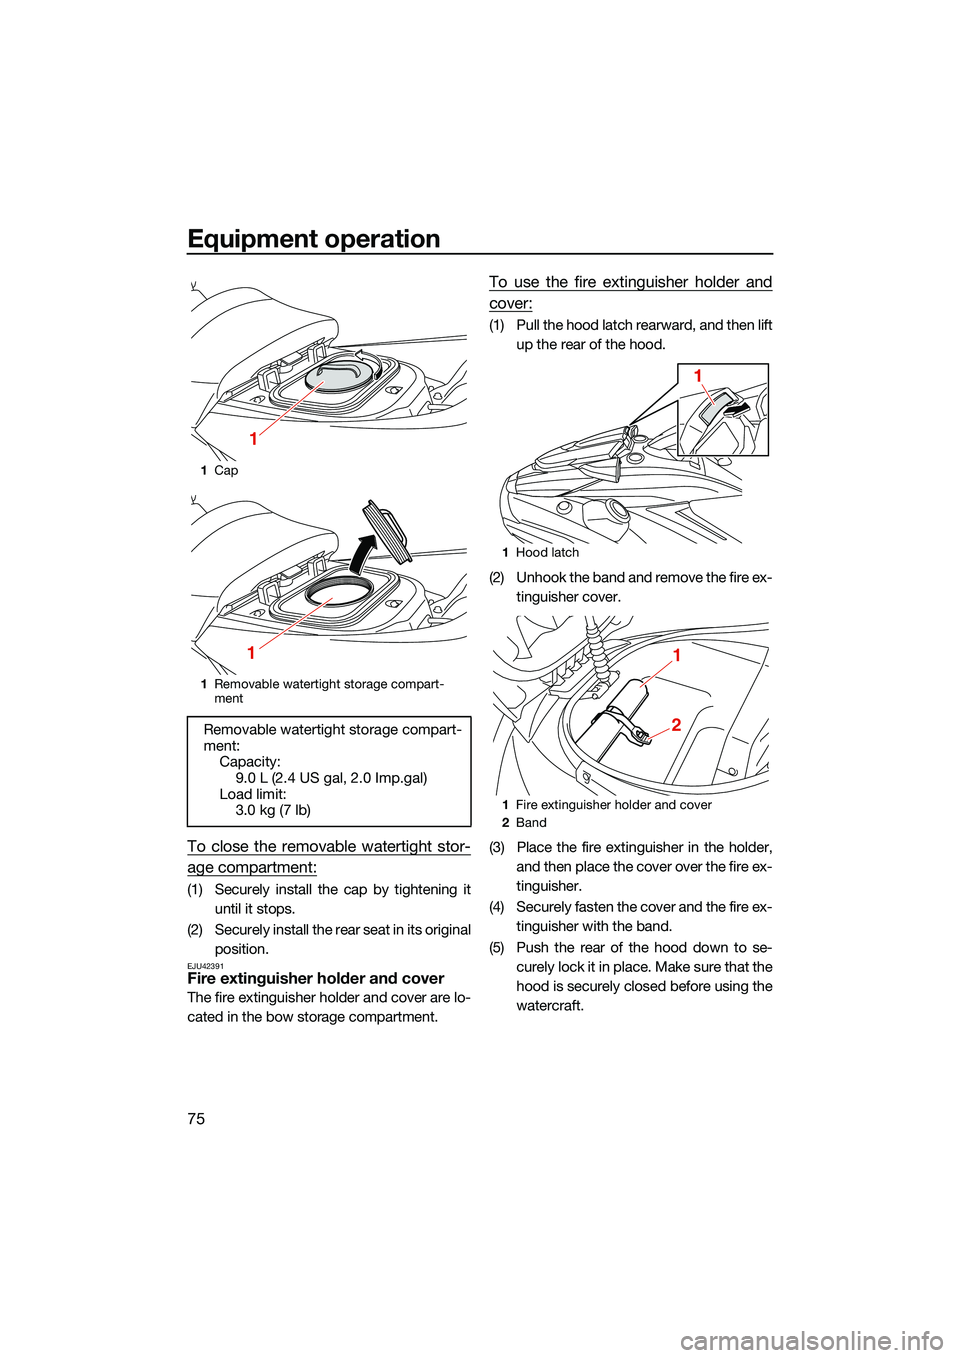 YAMAHA FX HO CRUISER 2022 User Guide Equipment operation
75
To close the removable watertight stor-
age compartment:
(1) Securely install the cap by tightening ituntil it stops.
(2) Securely install the rear seat in its original position